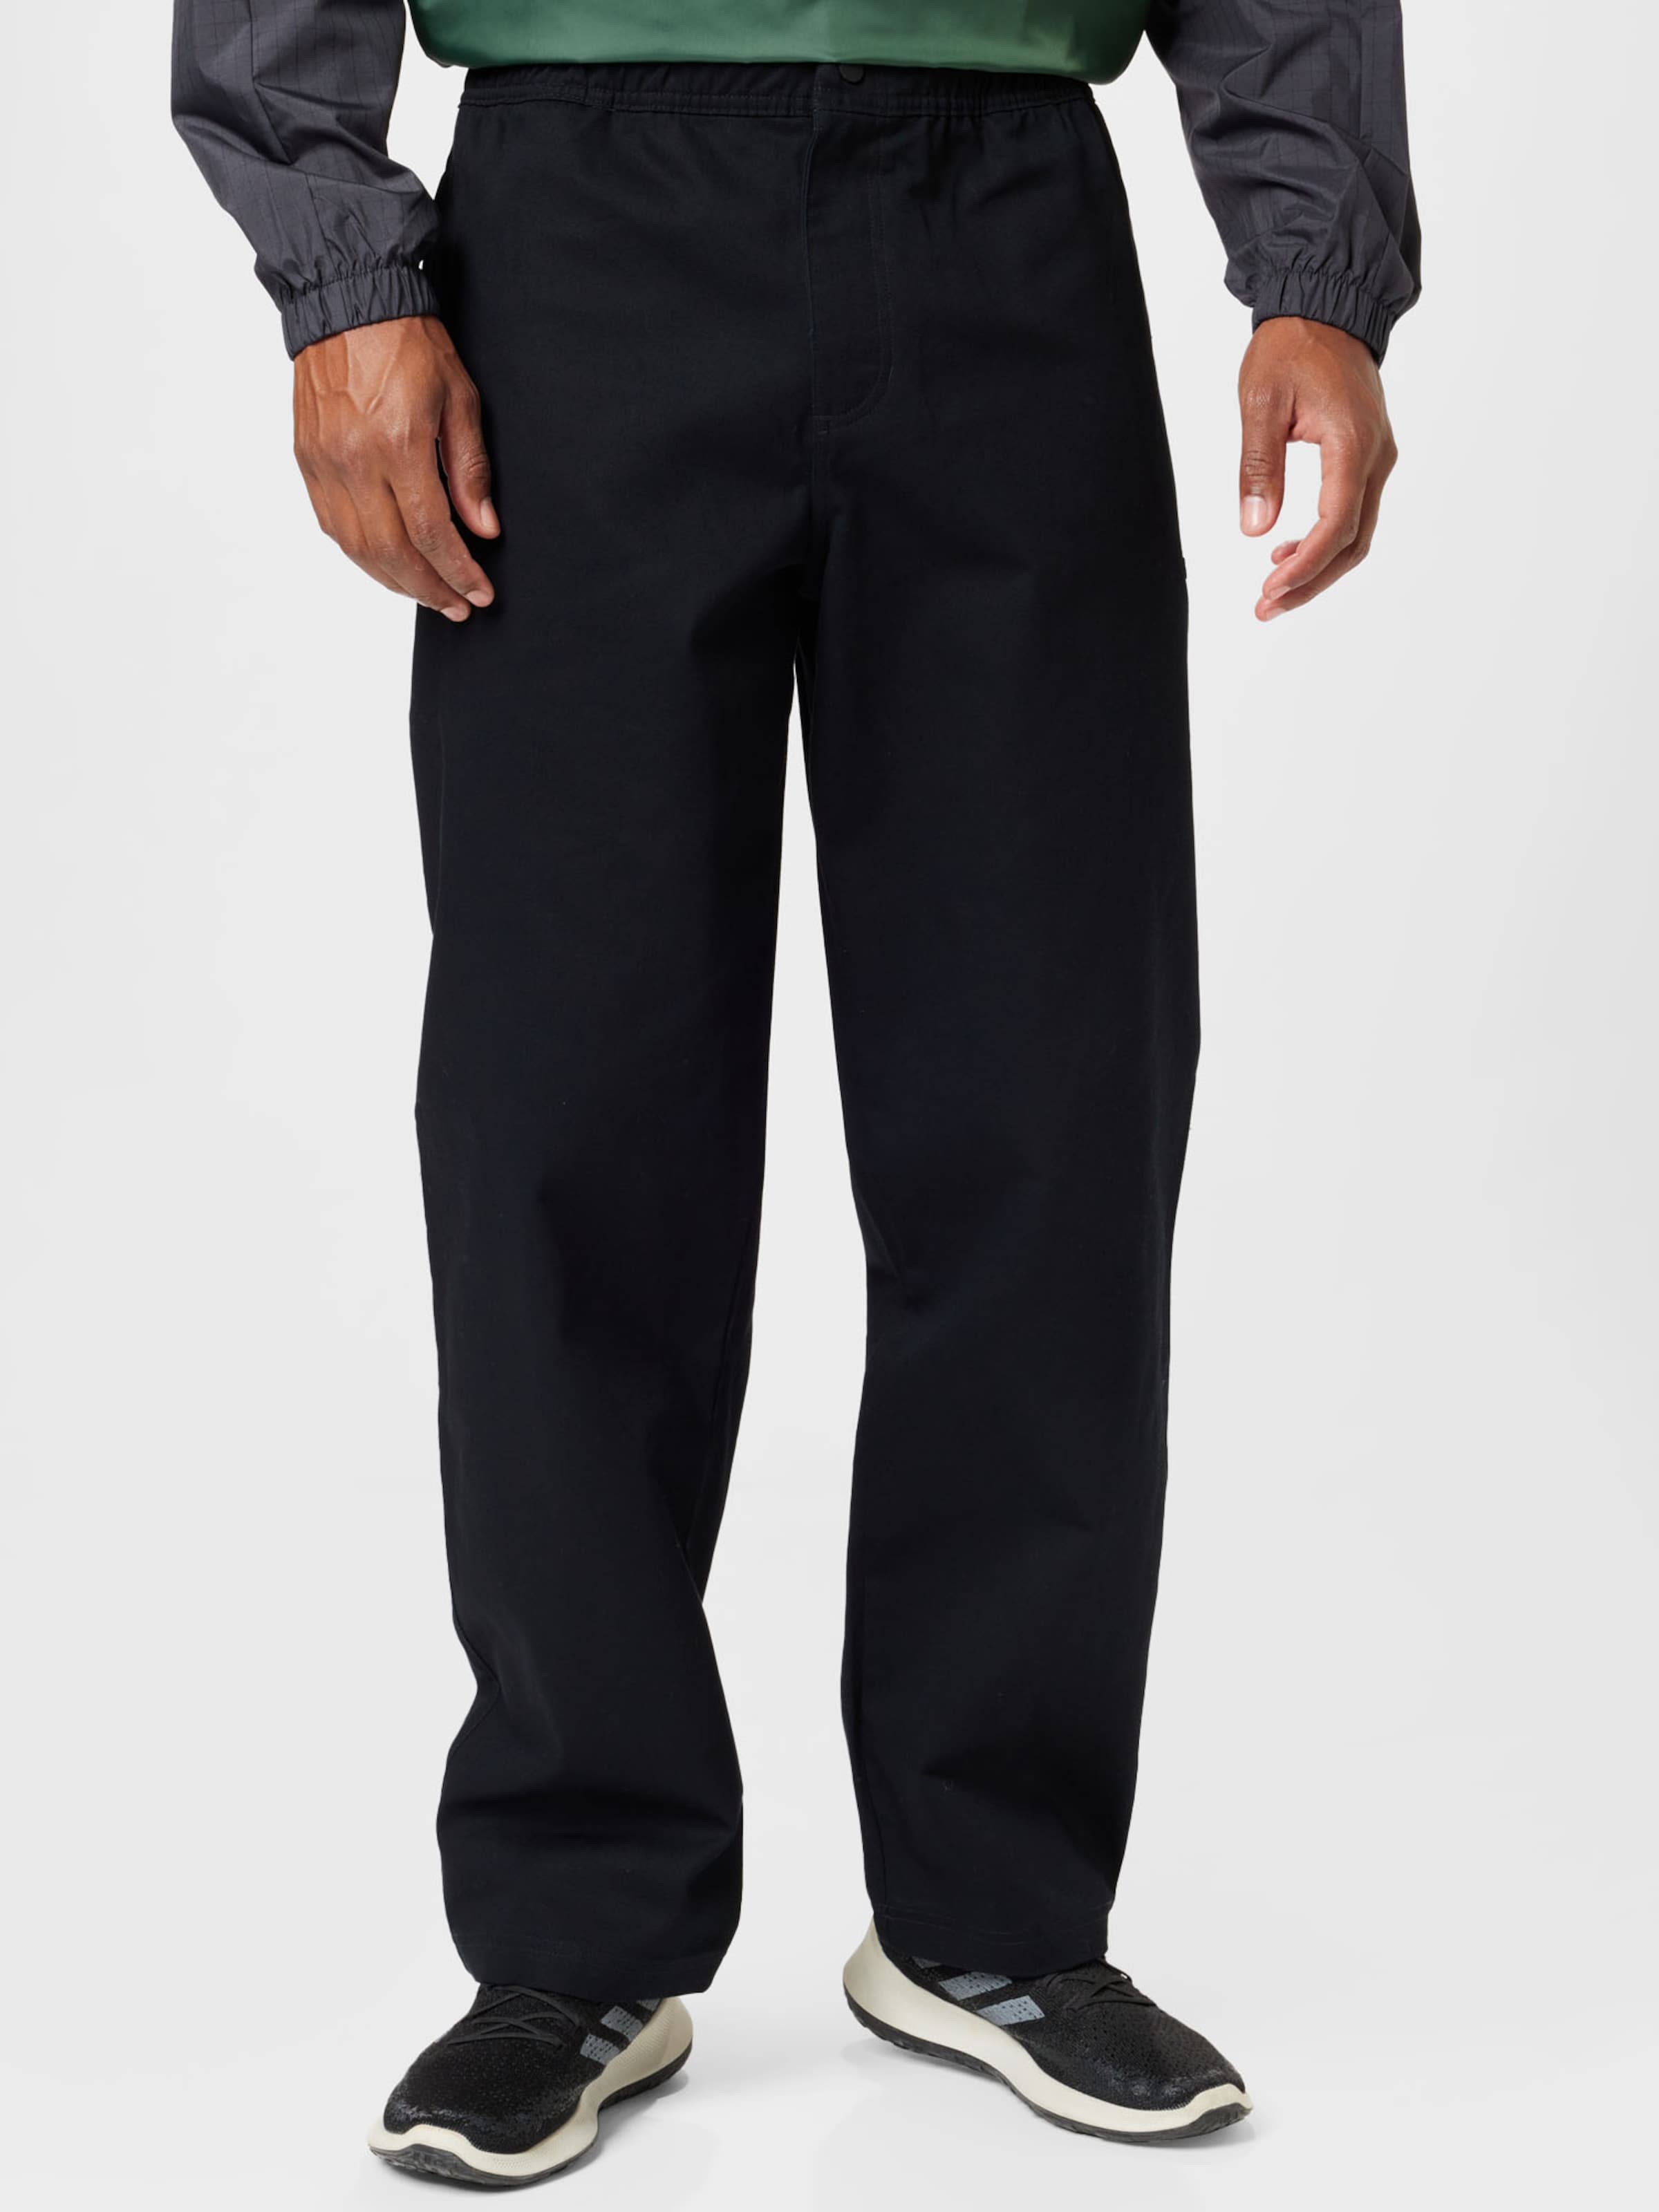 Fabric pants Black for men   Buy online   ABOUT YOU